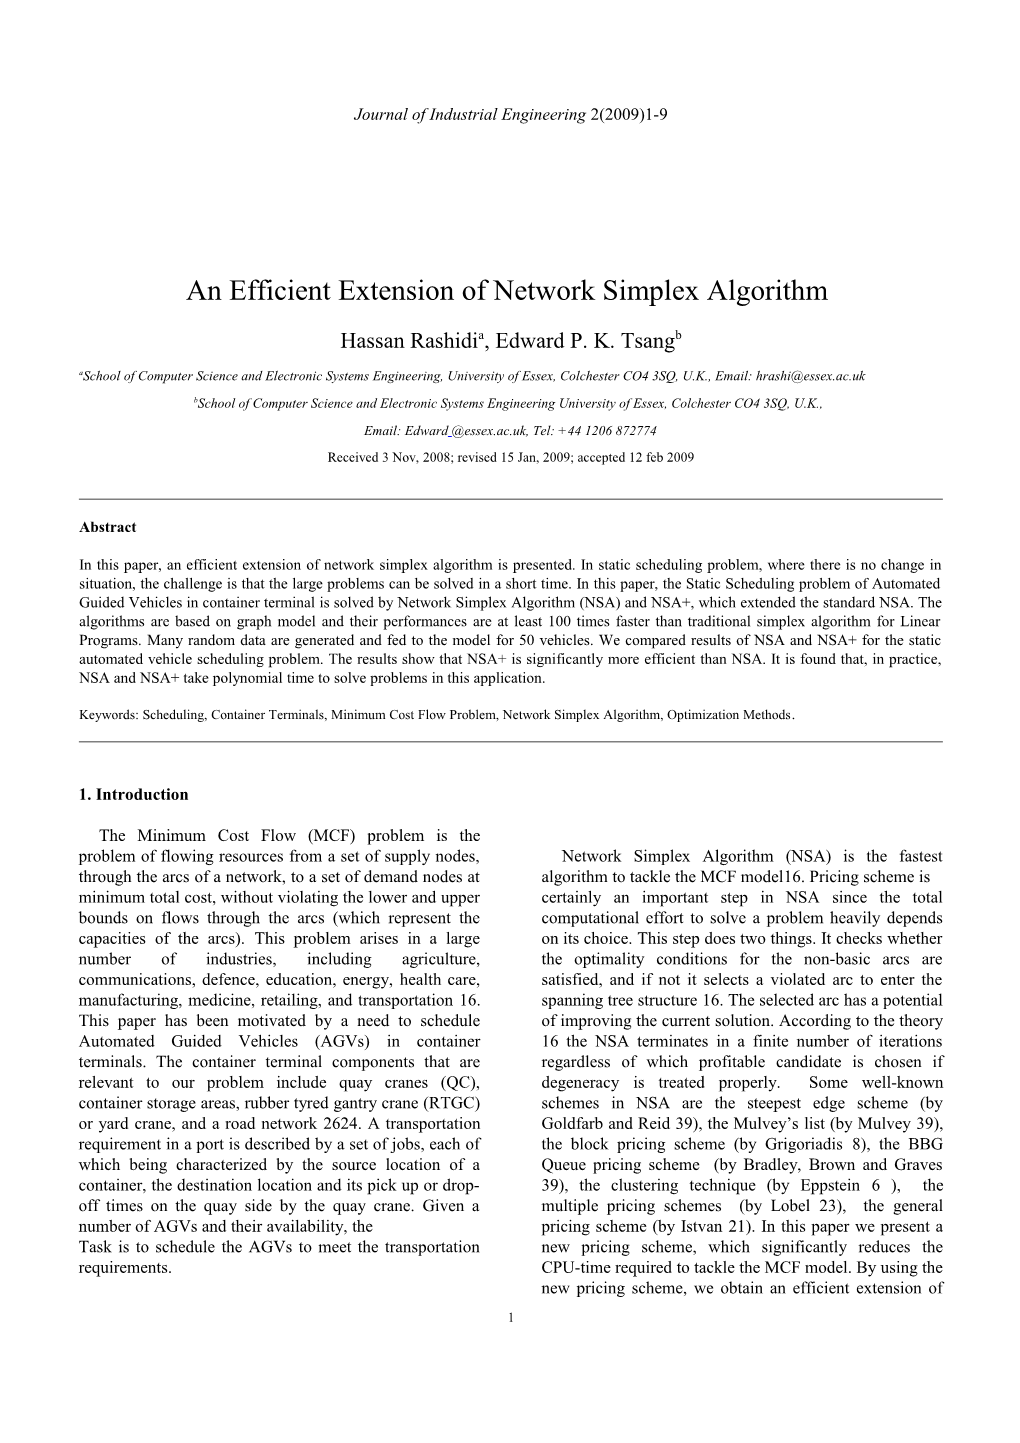 Applying the Extended Network Simplex Algorithm